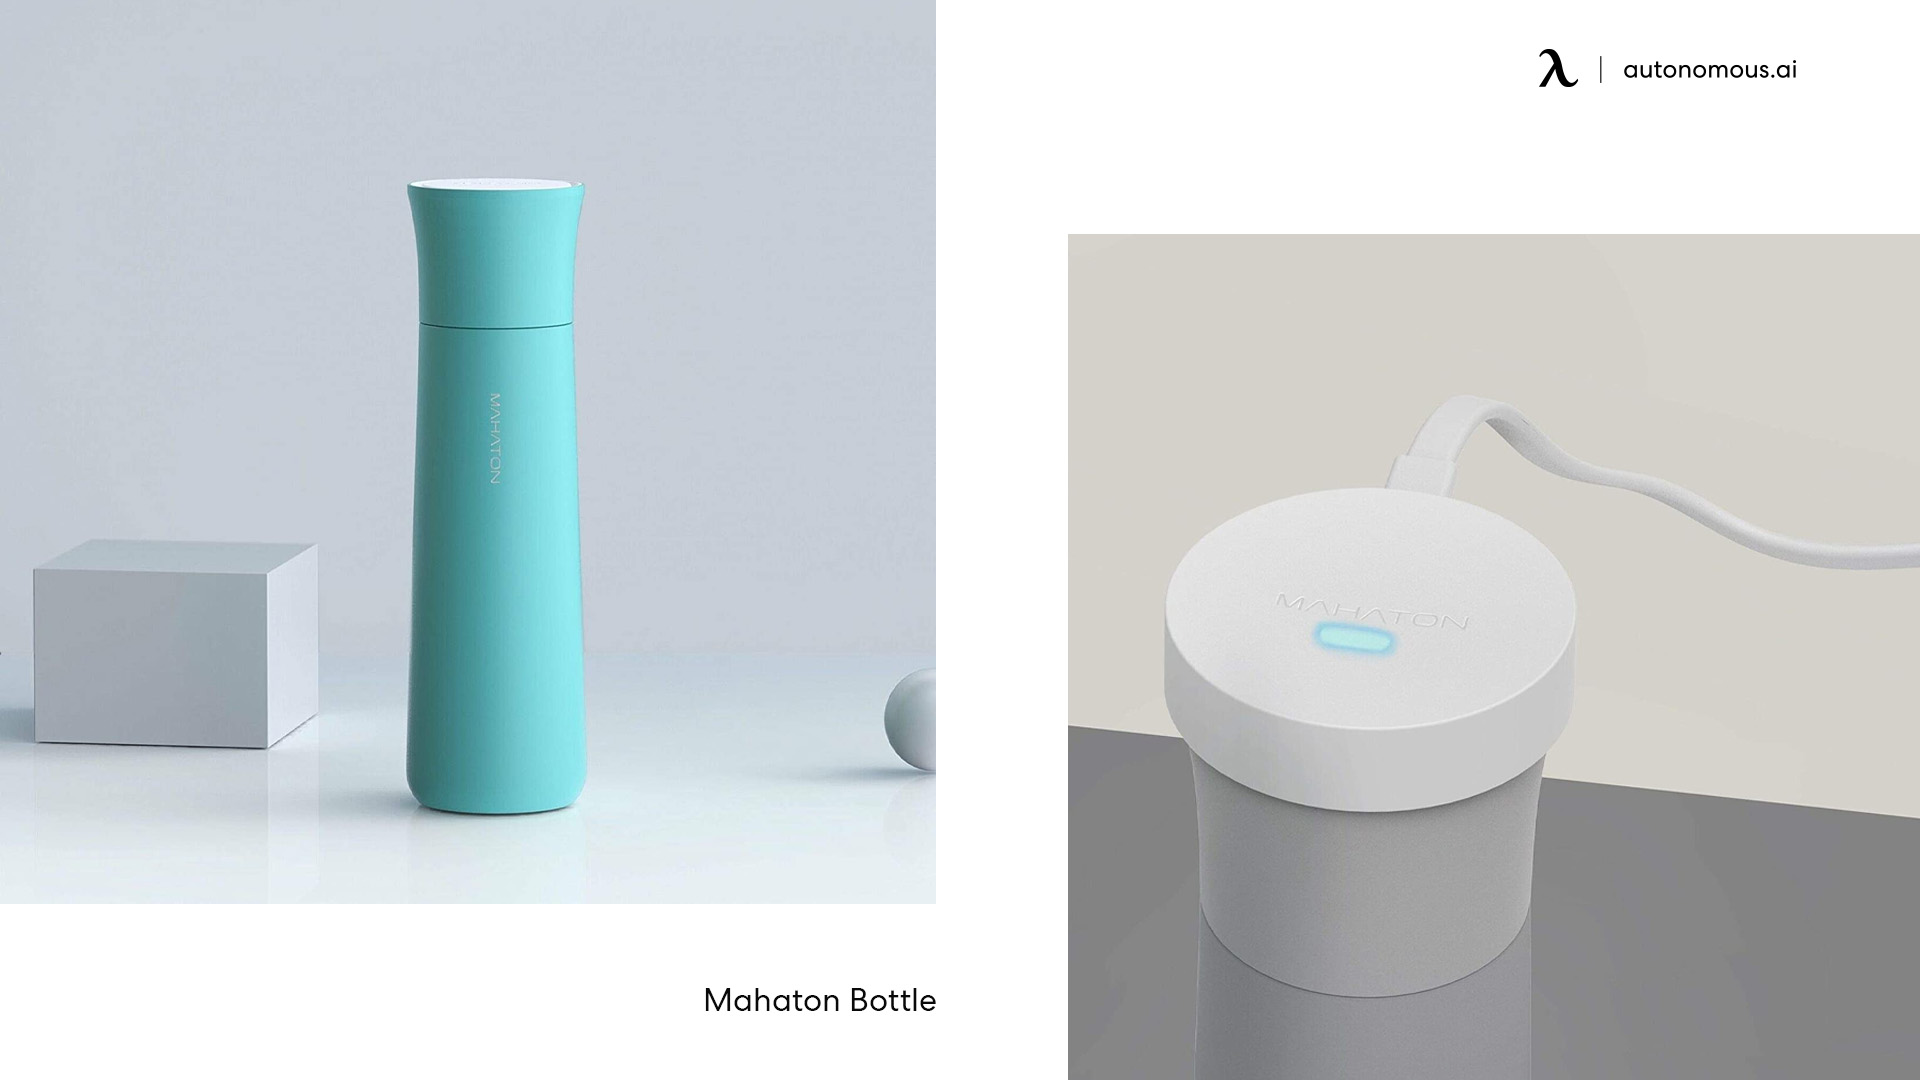 Mahaton's Self-cleaning Water Bottle